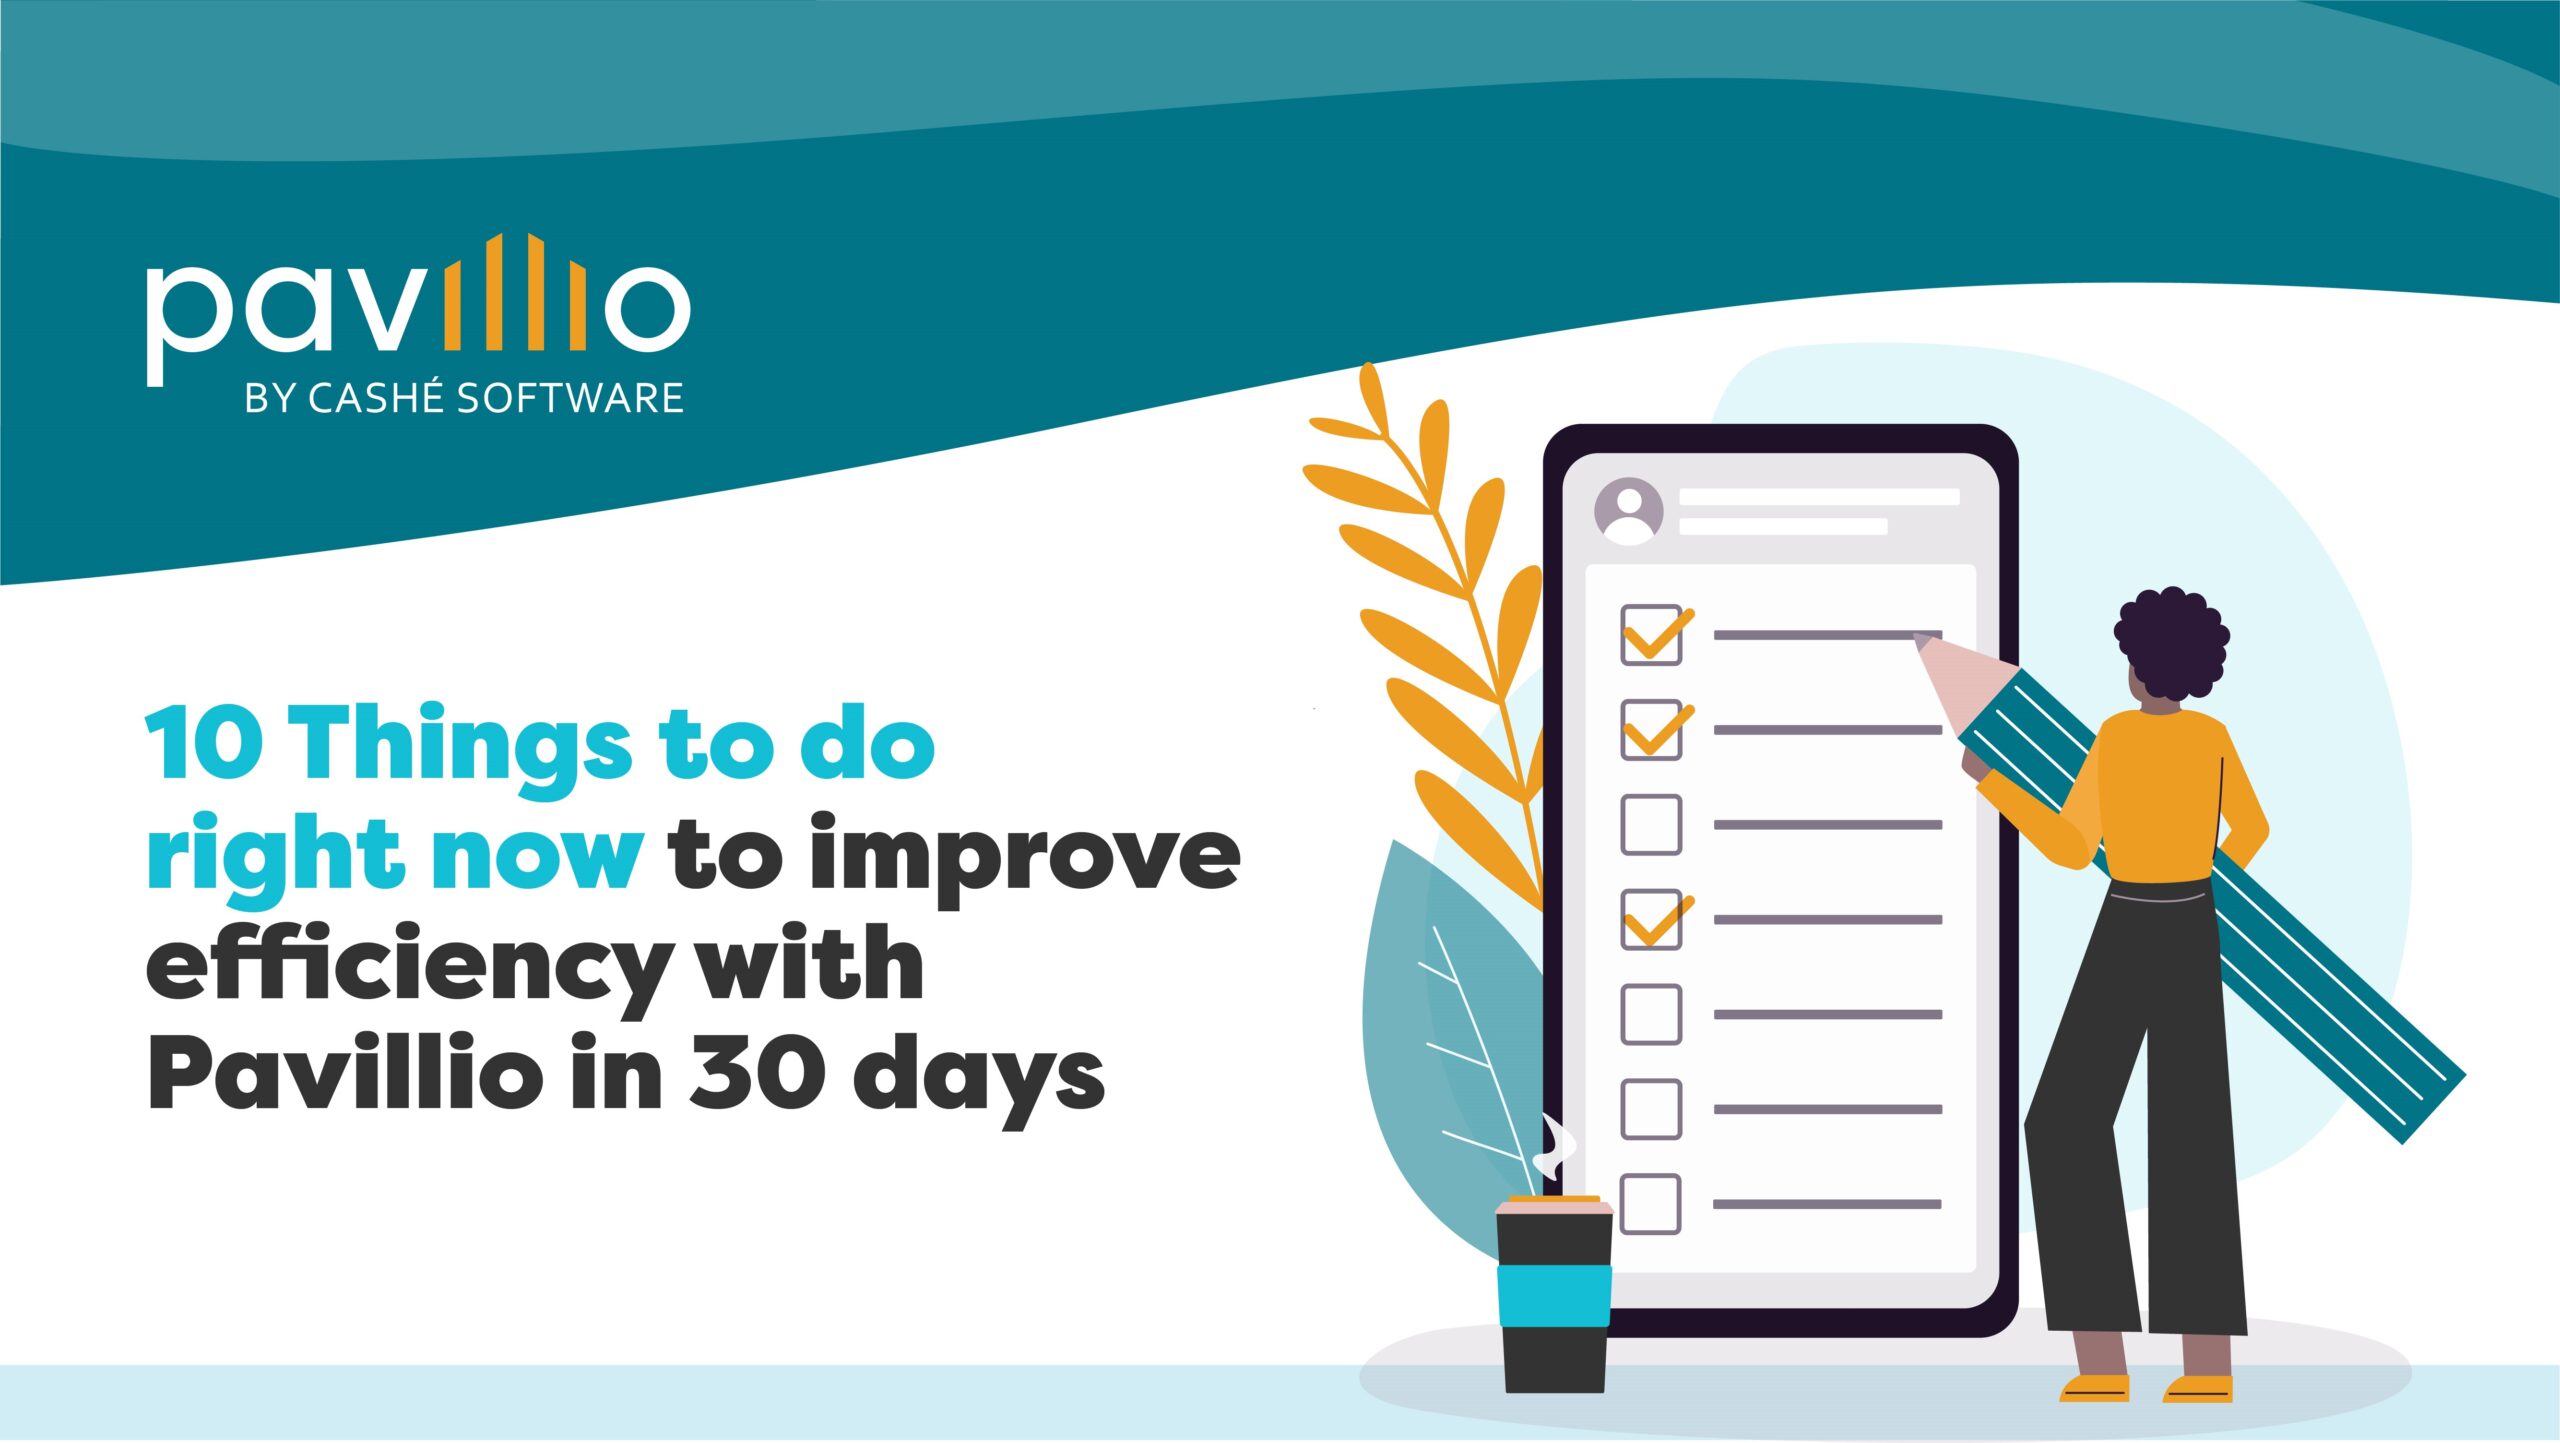 10 ways to maximize Pavillio and see results in 30 days or less